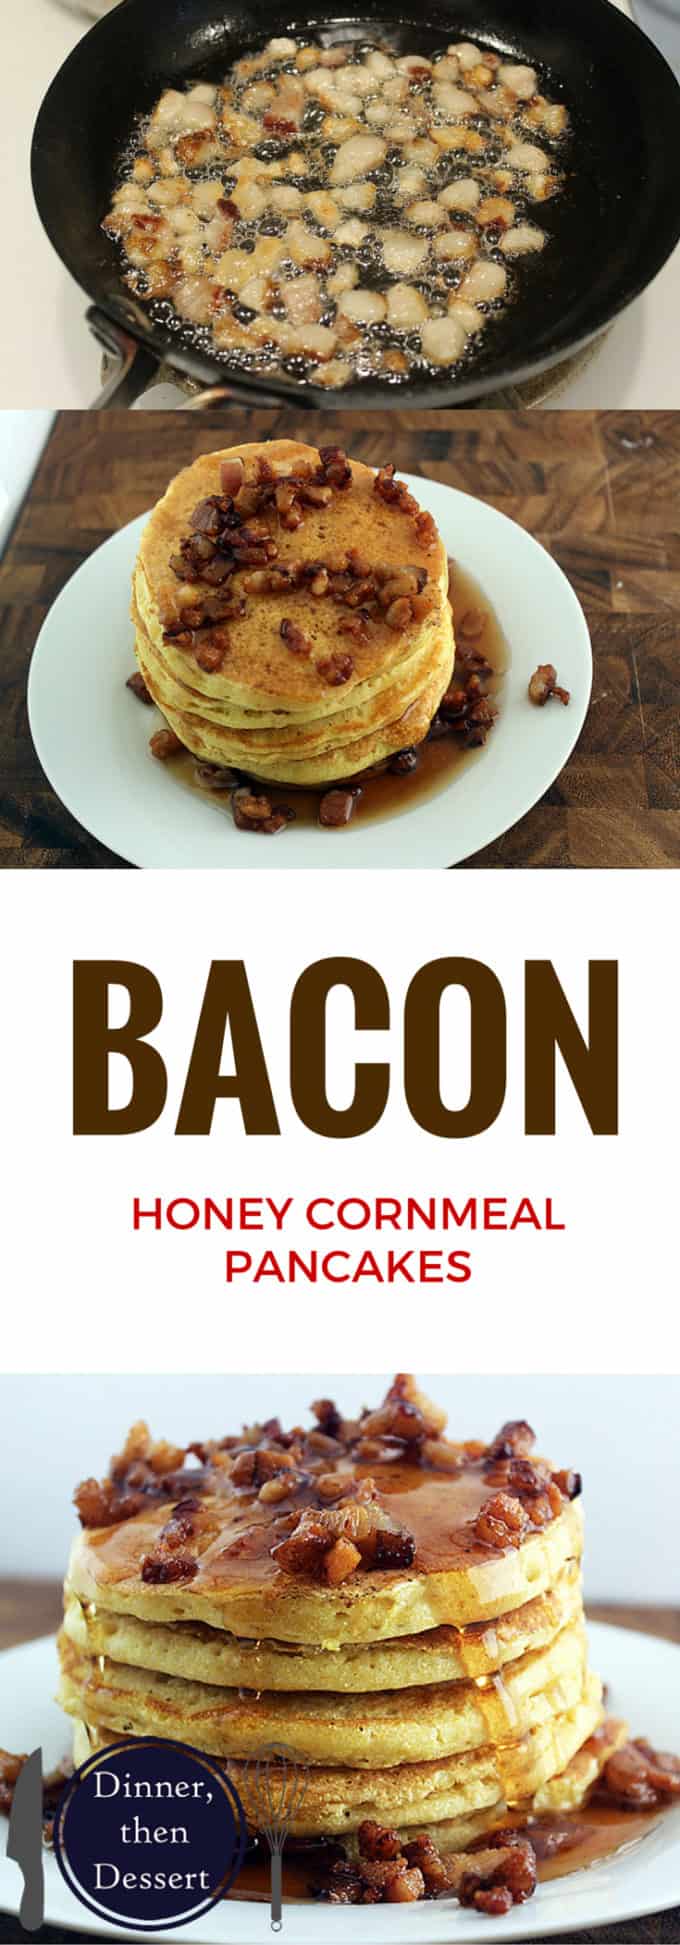 A sweet and savory pancake topped with crispy bacon. They taste like the softest, fluffiest cornbread you've ever had.